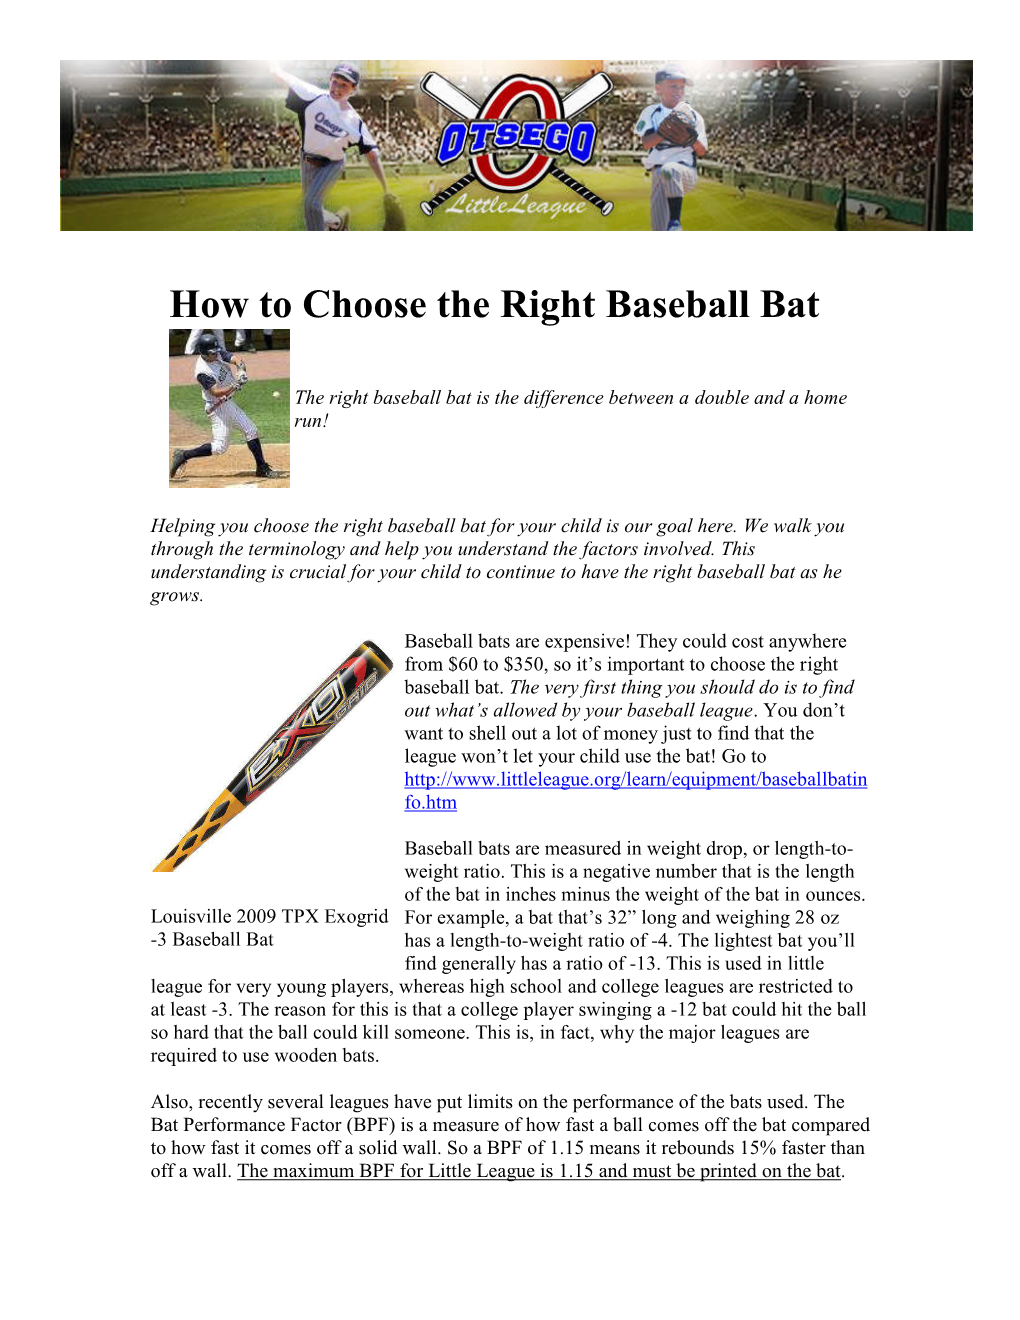 How to Choose the Right Baseball Bat